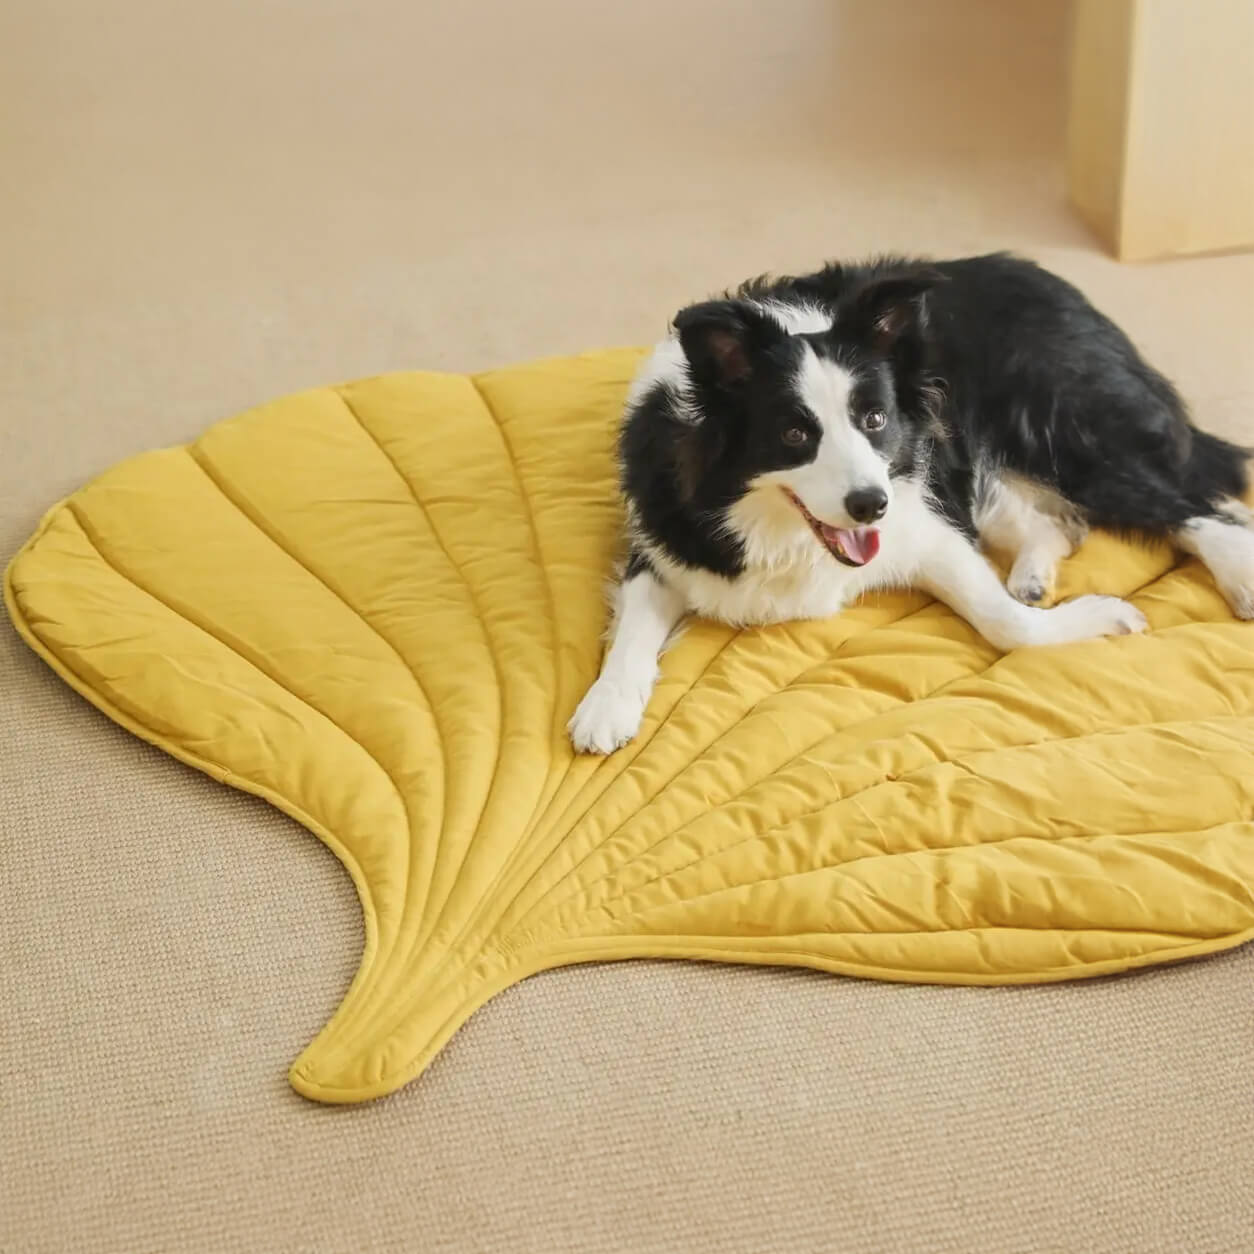 Stellar-Skeleton-Chill-Out-Leaf-Pet-Cooling-Mat-Cooling-Mat-for-Dogs-Cats-Bunnies-Rabbits-Pet-Cooling-Blanket-00